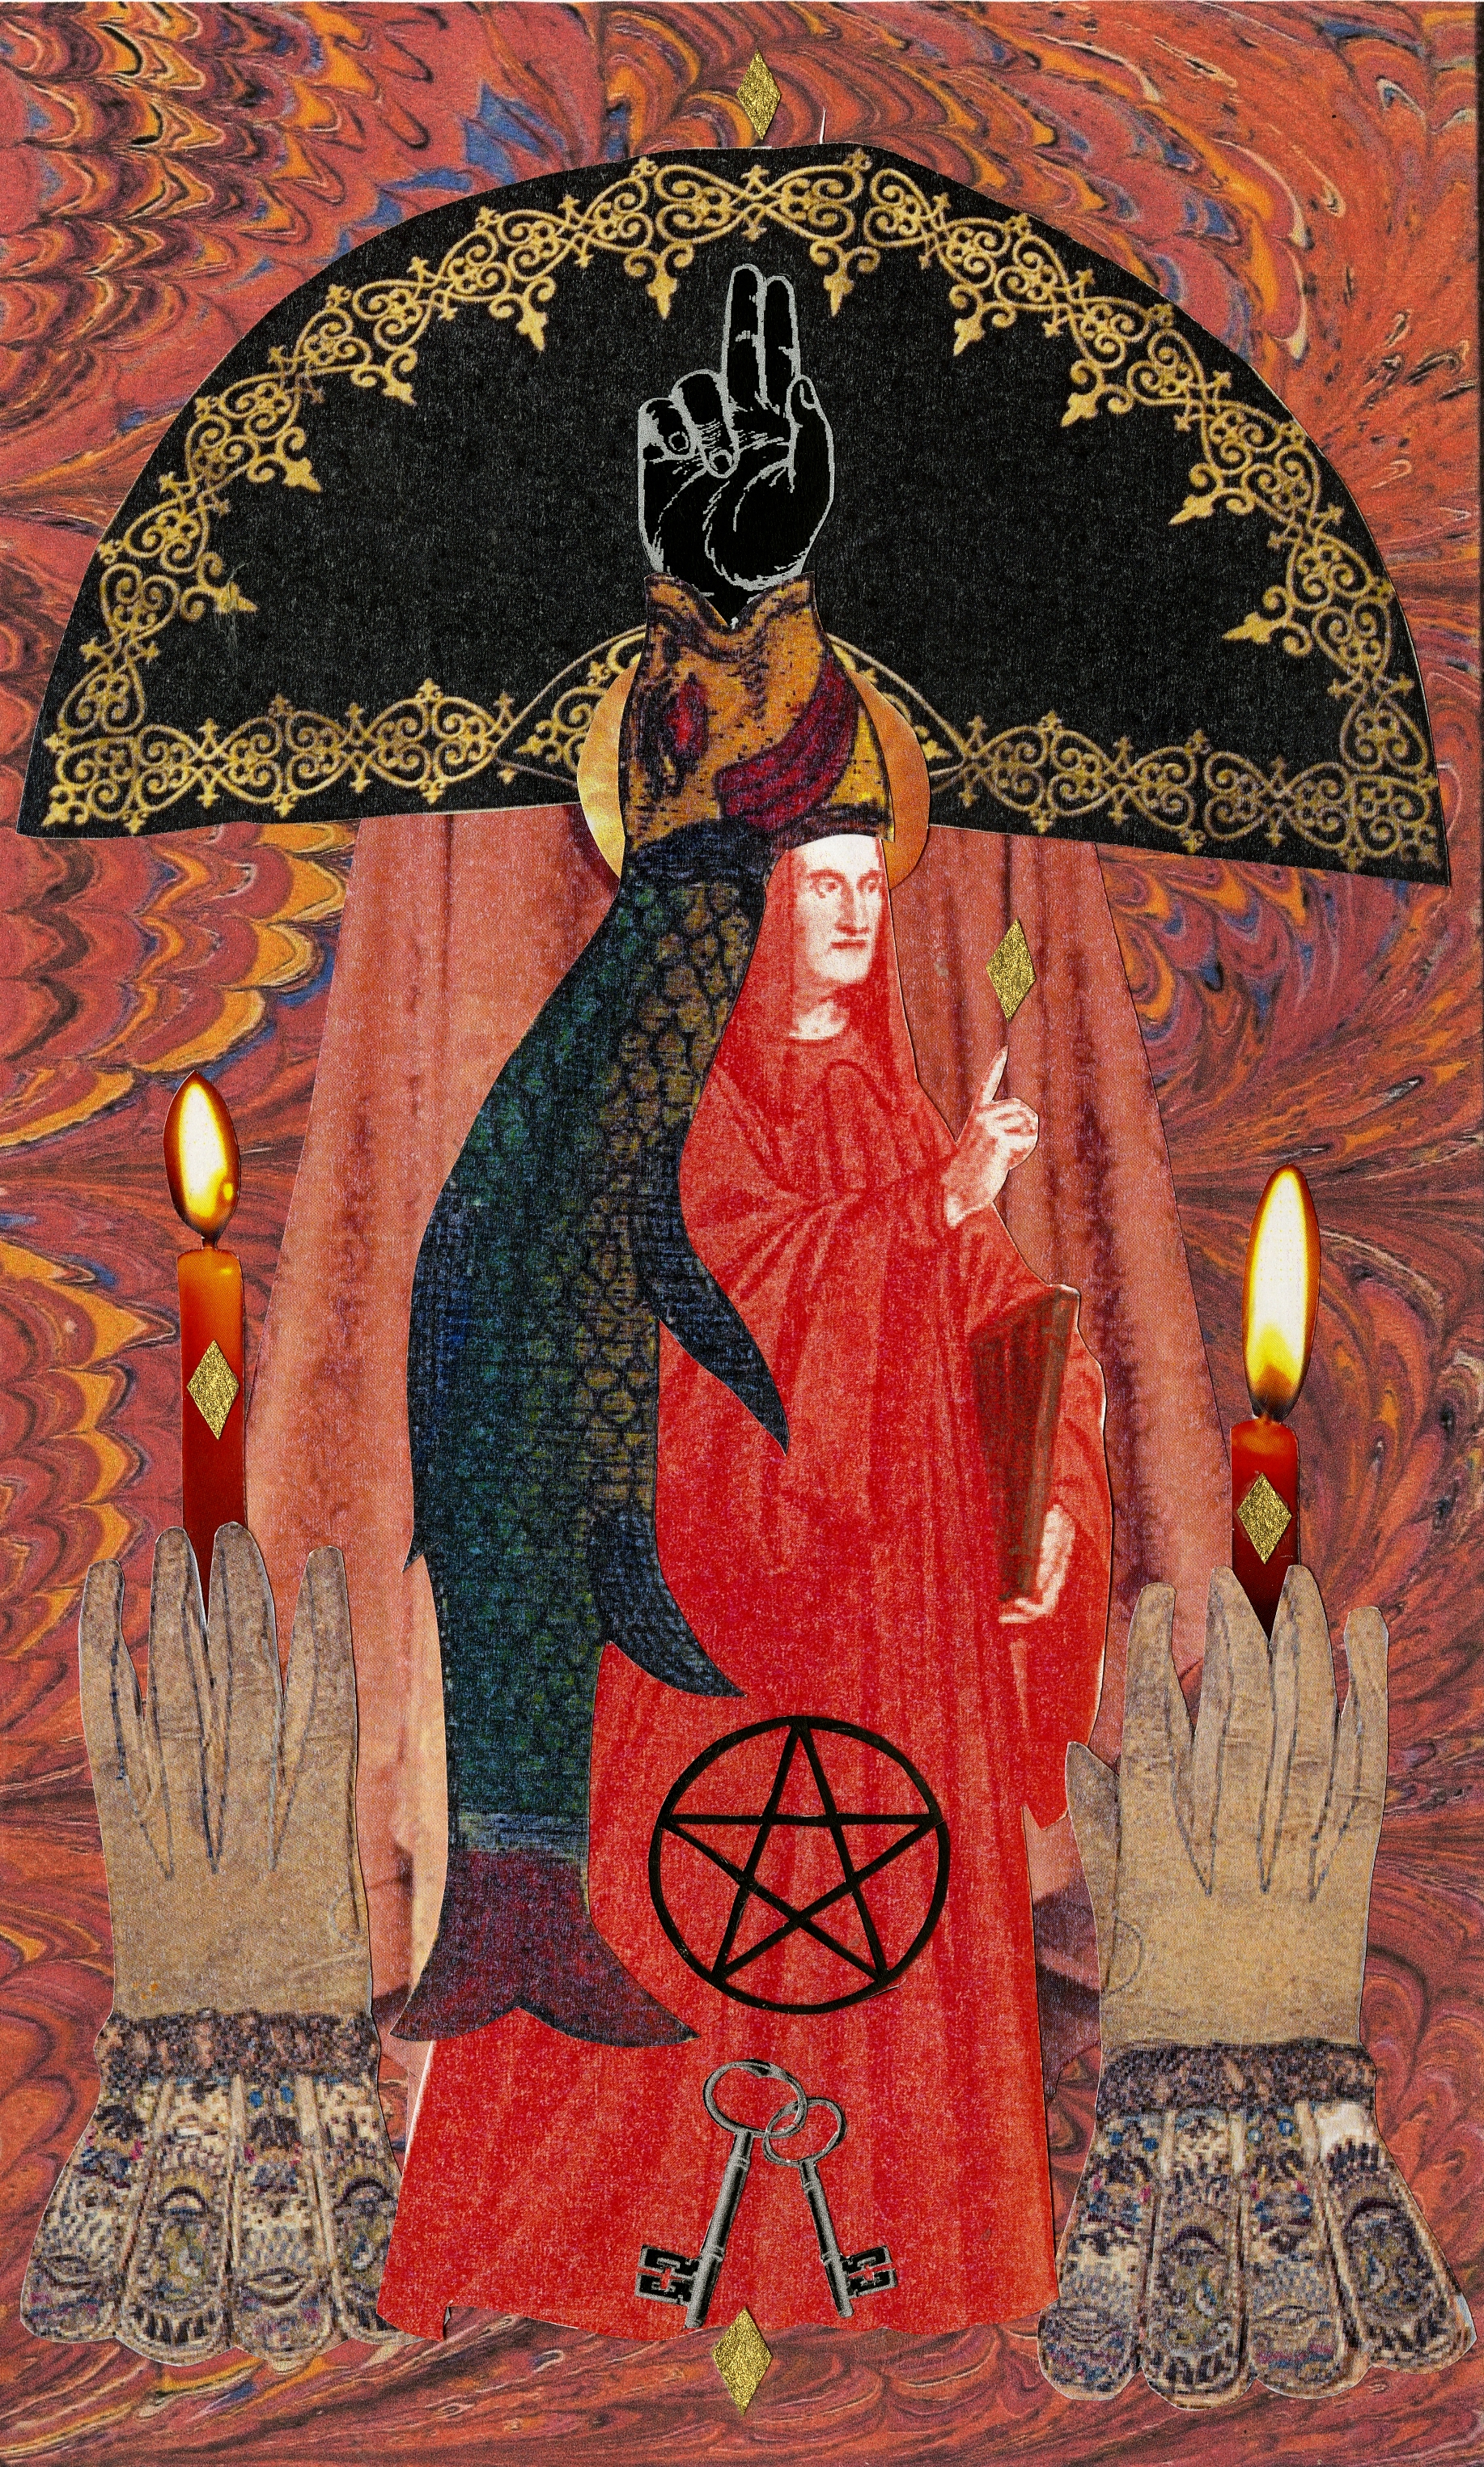 Hierophant scan cropped fix gold shpes.jpg